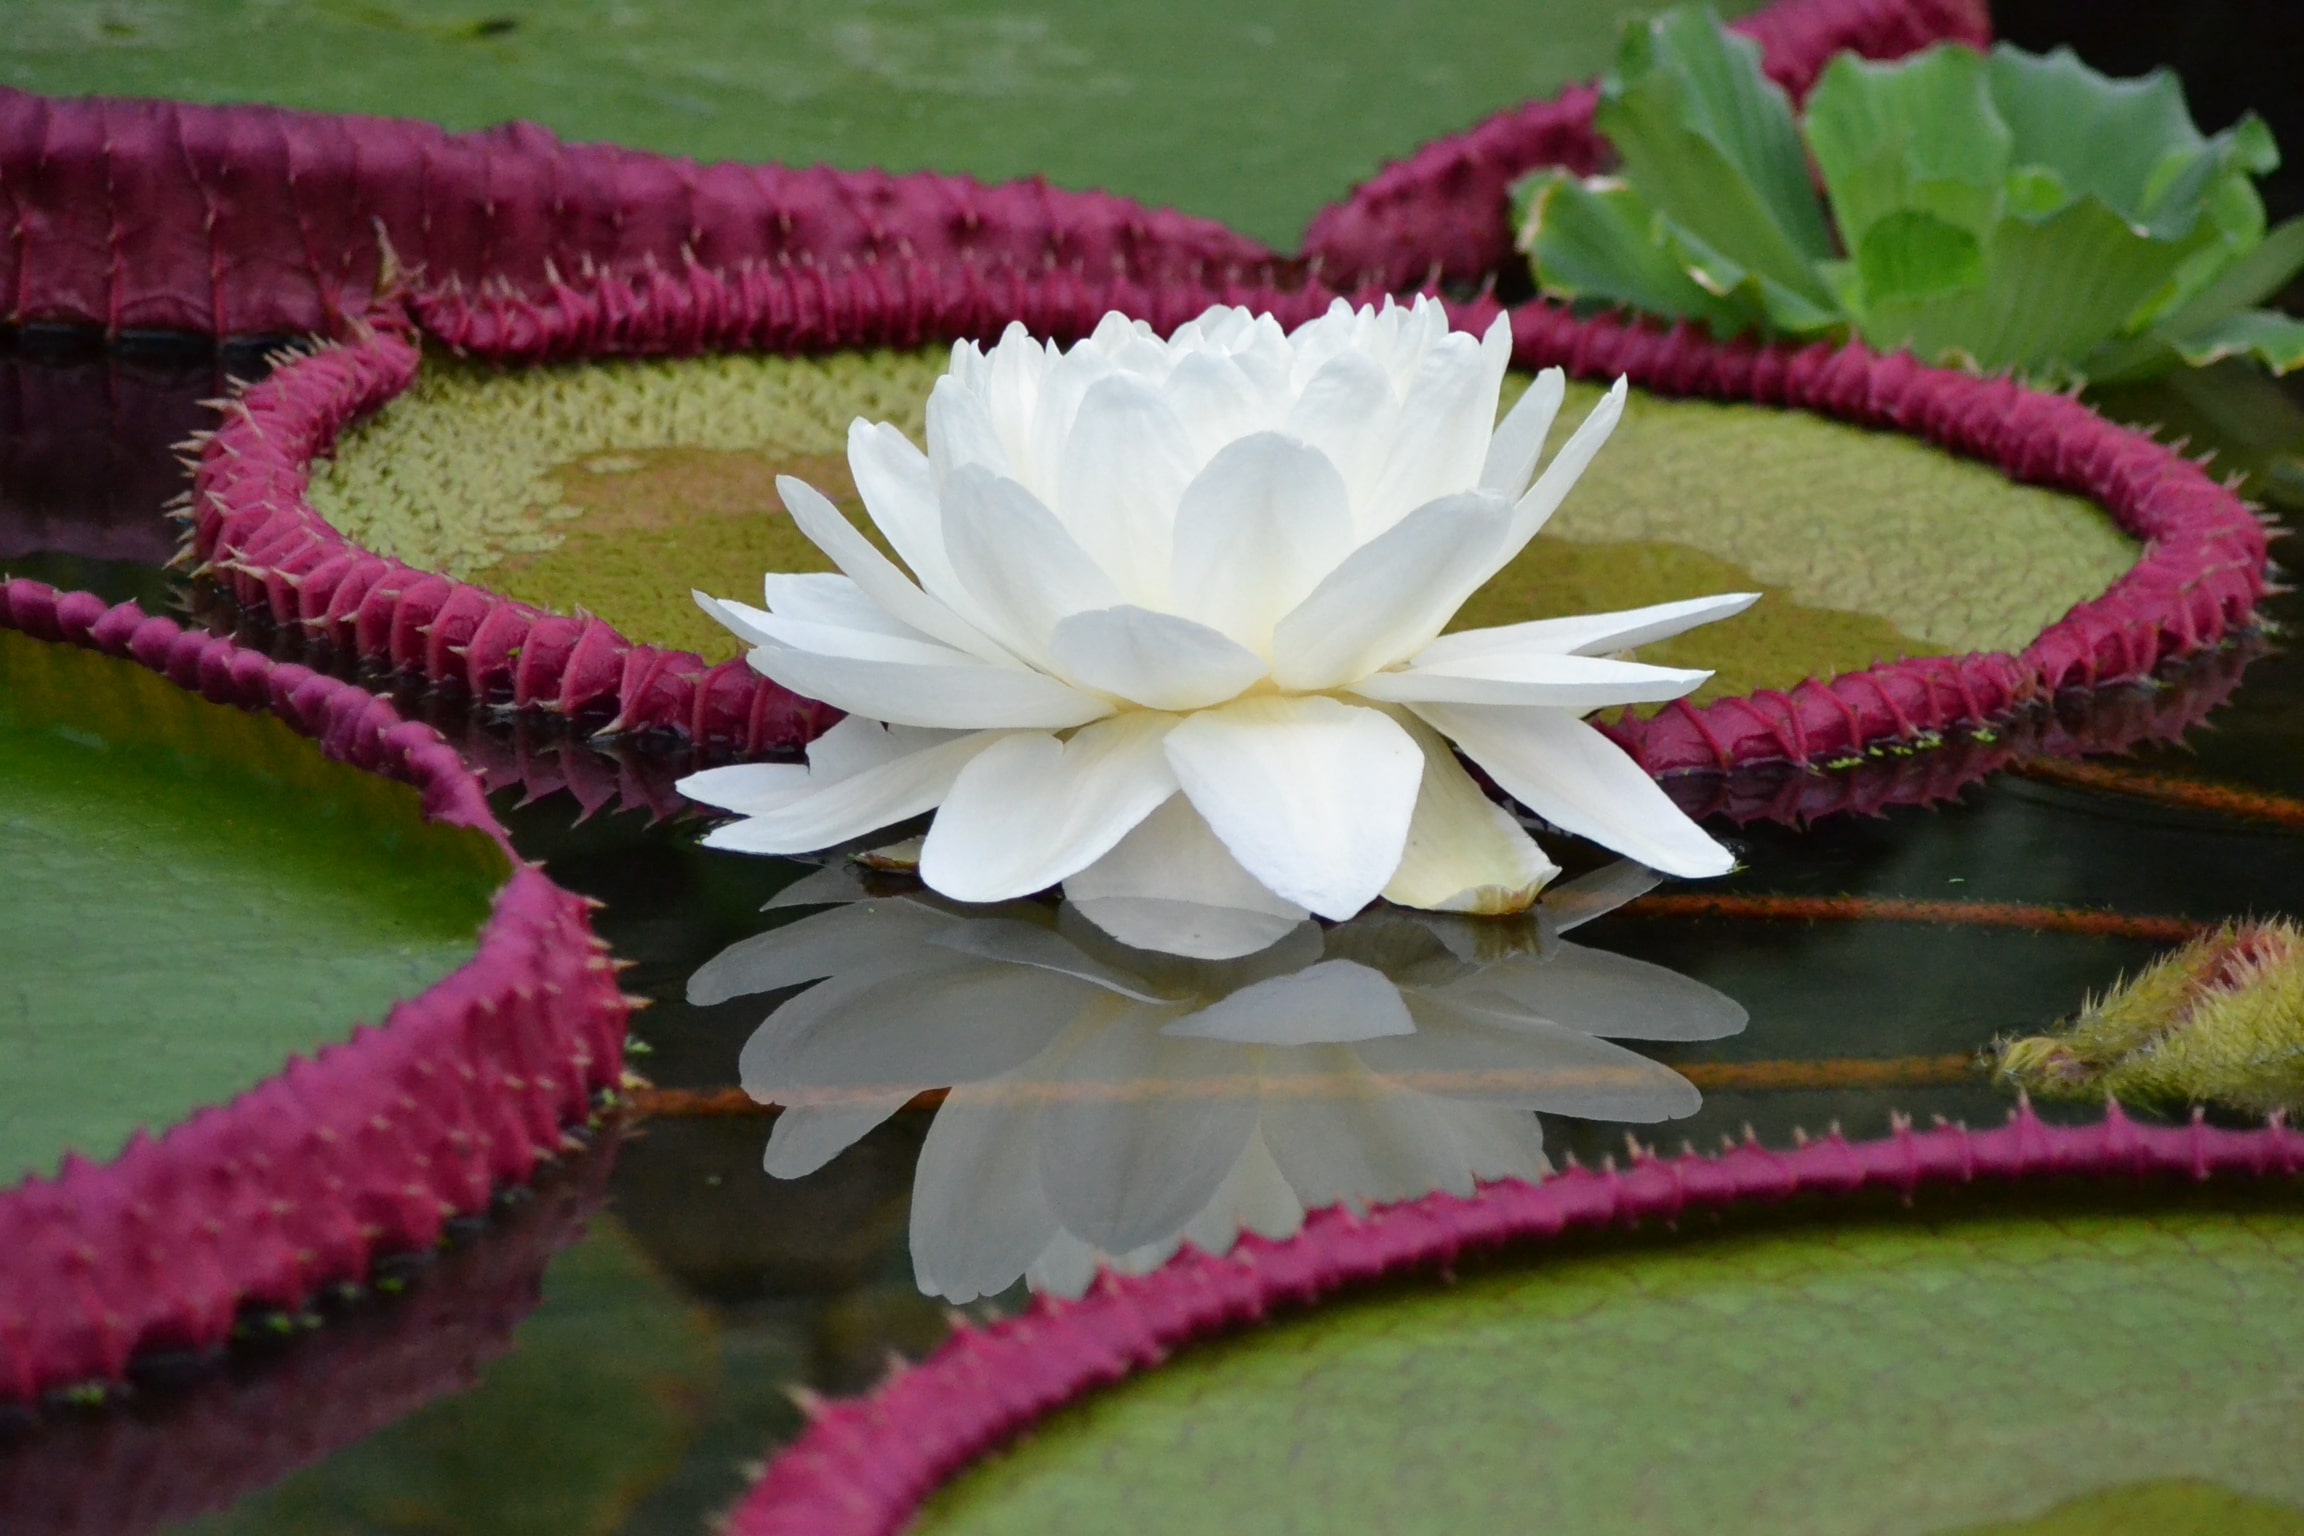 Large white flower surrounded by giant waterlily pads